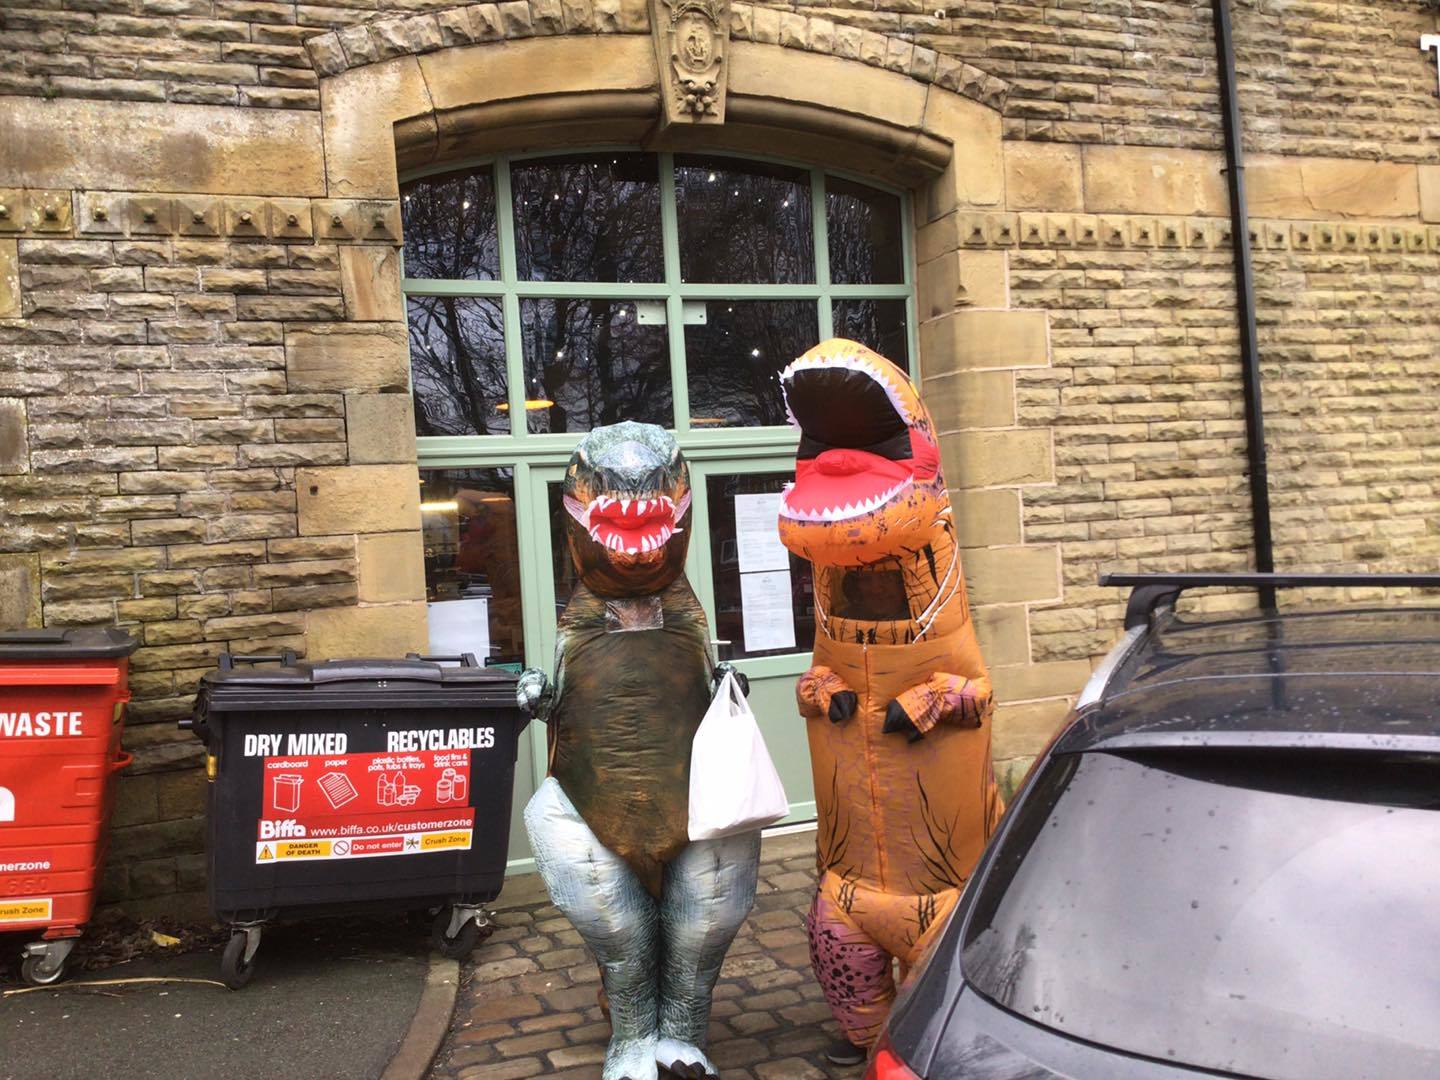 The dino deliveries in Darwen were a roaring success